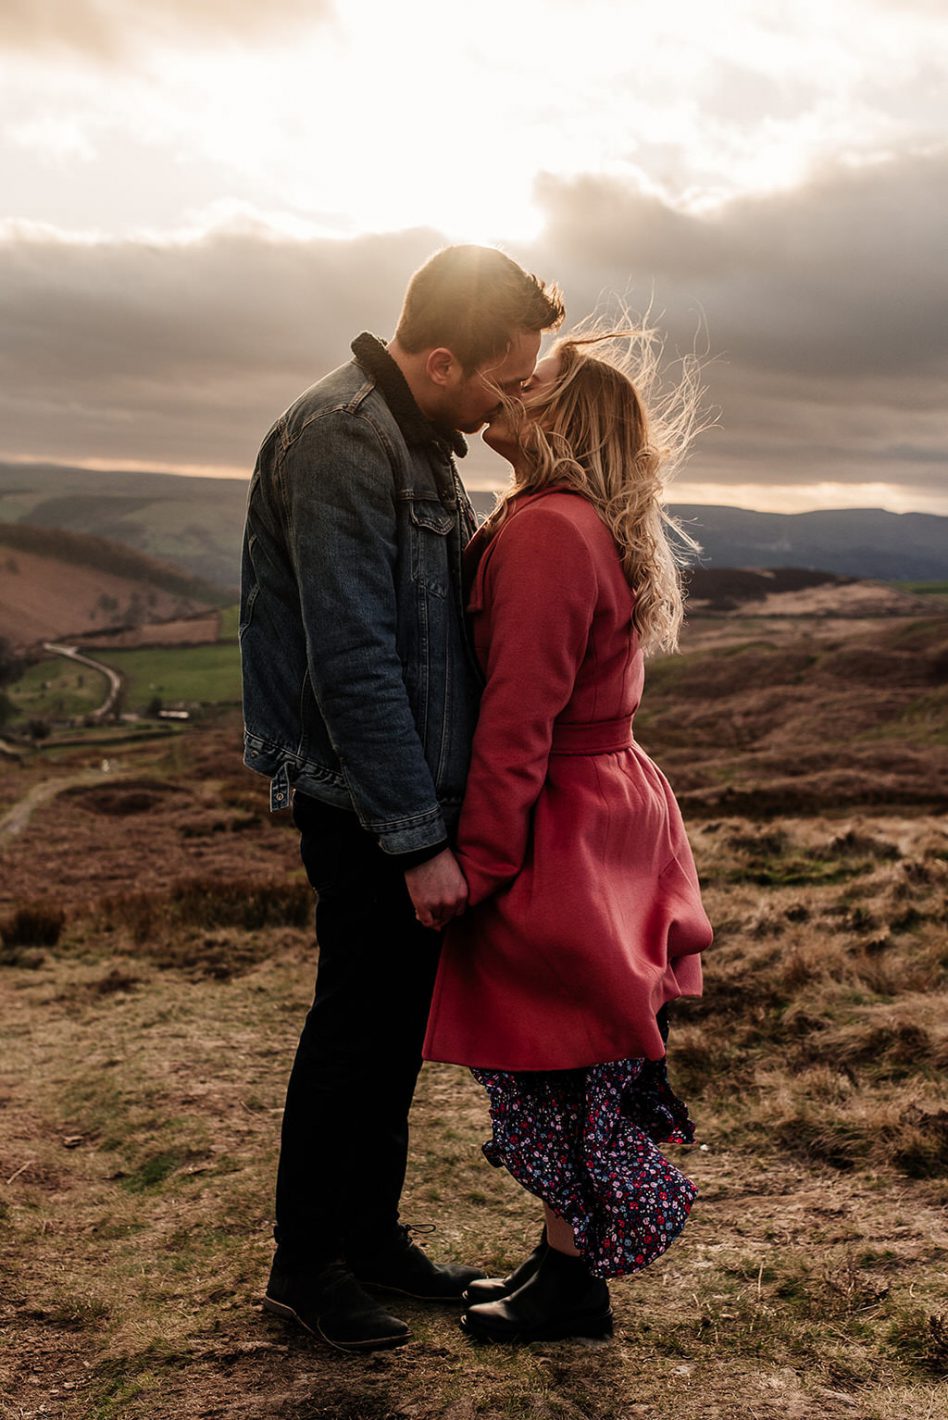 Peak district engagement shoot with Isobel and Tom